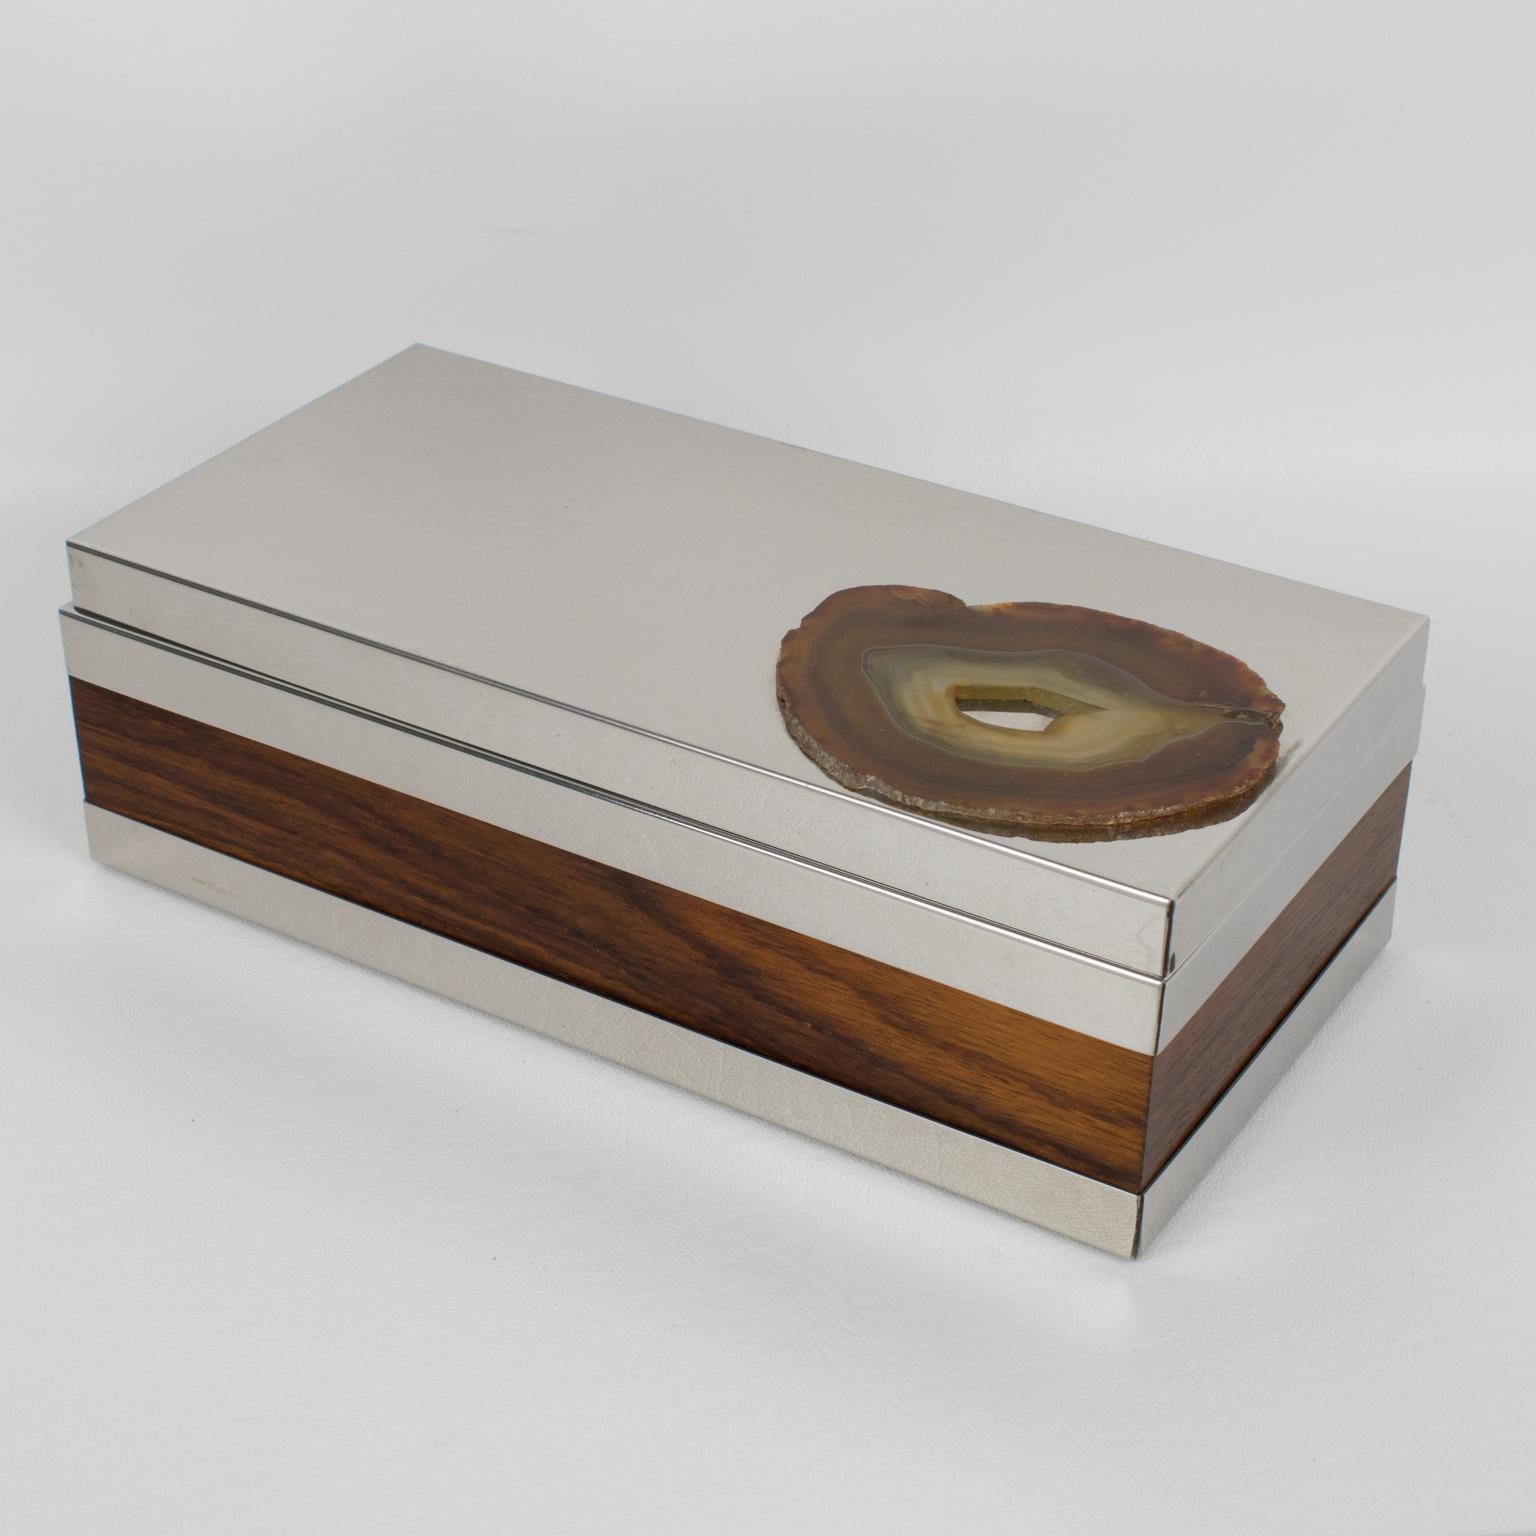 Modern Silver Plate and Wood Box with Agate Stone Slab Decor, Italy 1980s For Sale